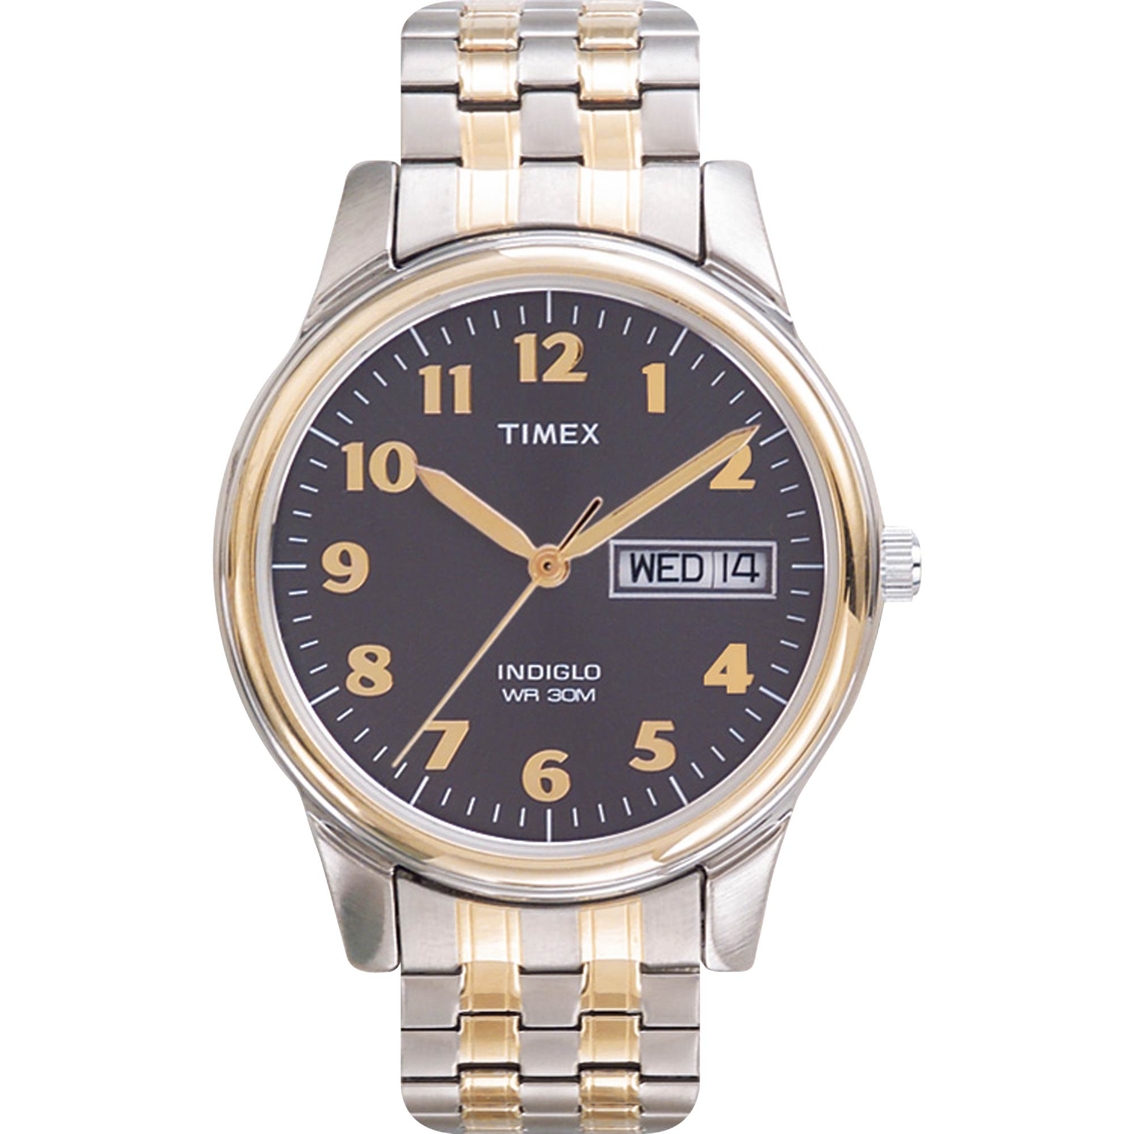 Timex Men's Elevated Classic Expansion Band Watch 264819j | Two